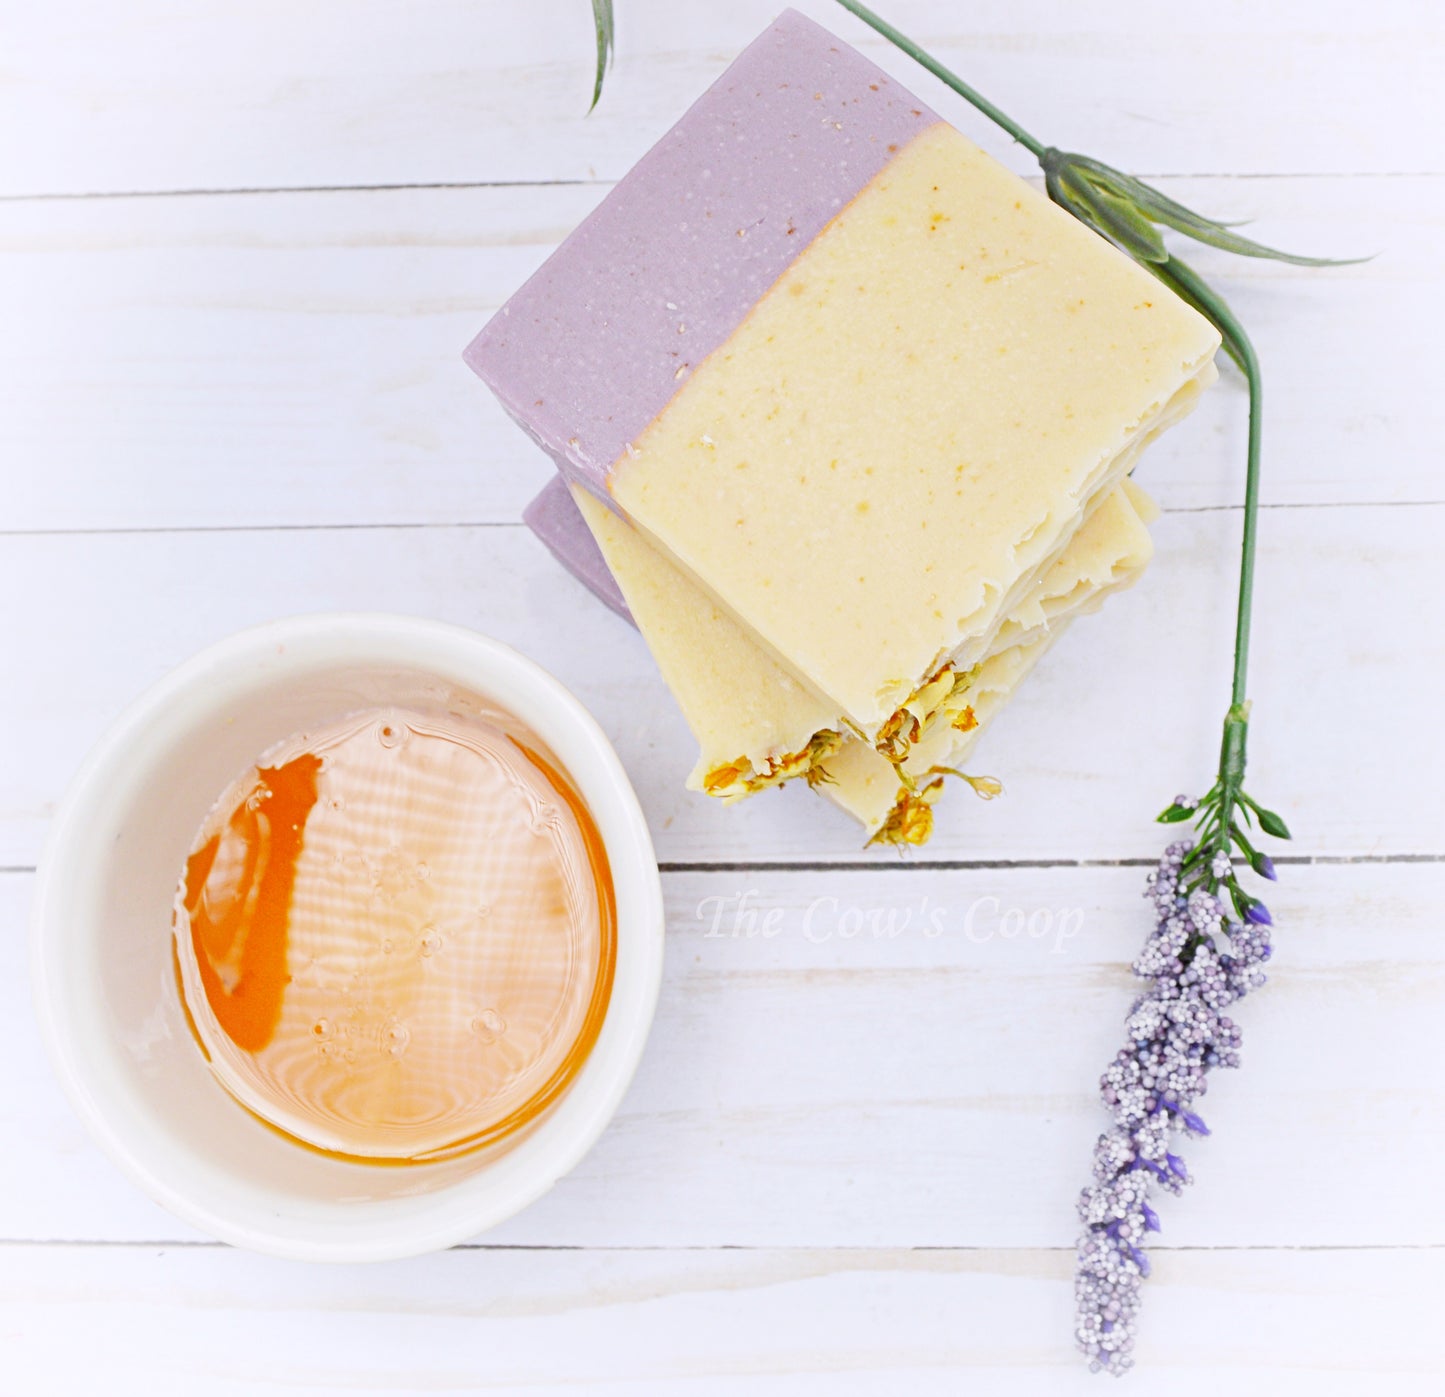 Lavender Bees - Cow and Goat Milk Soap